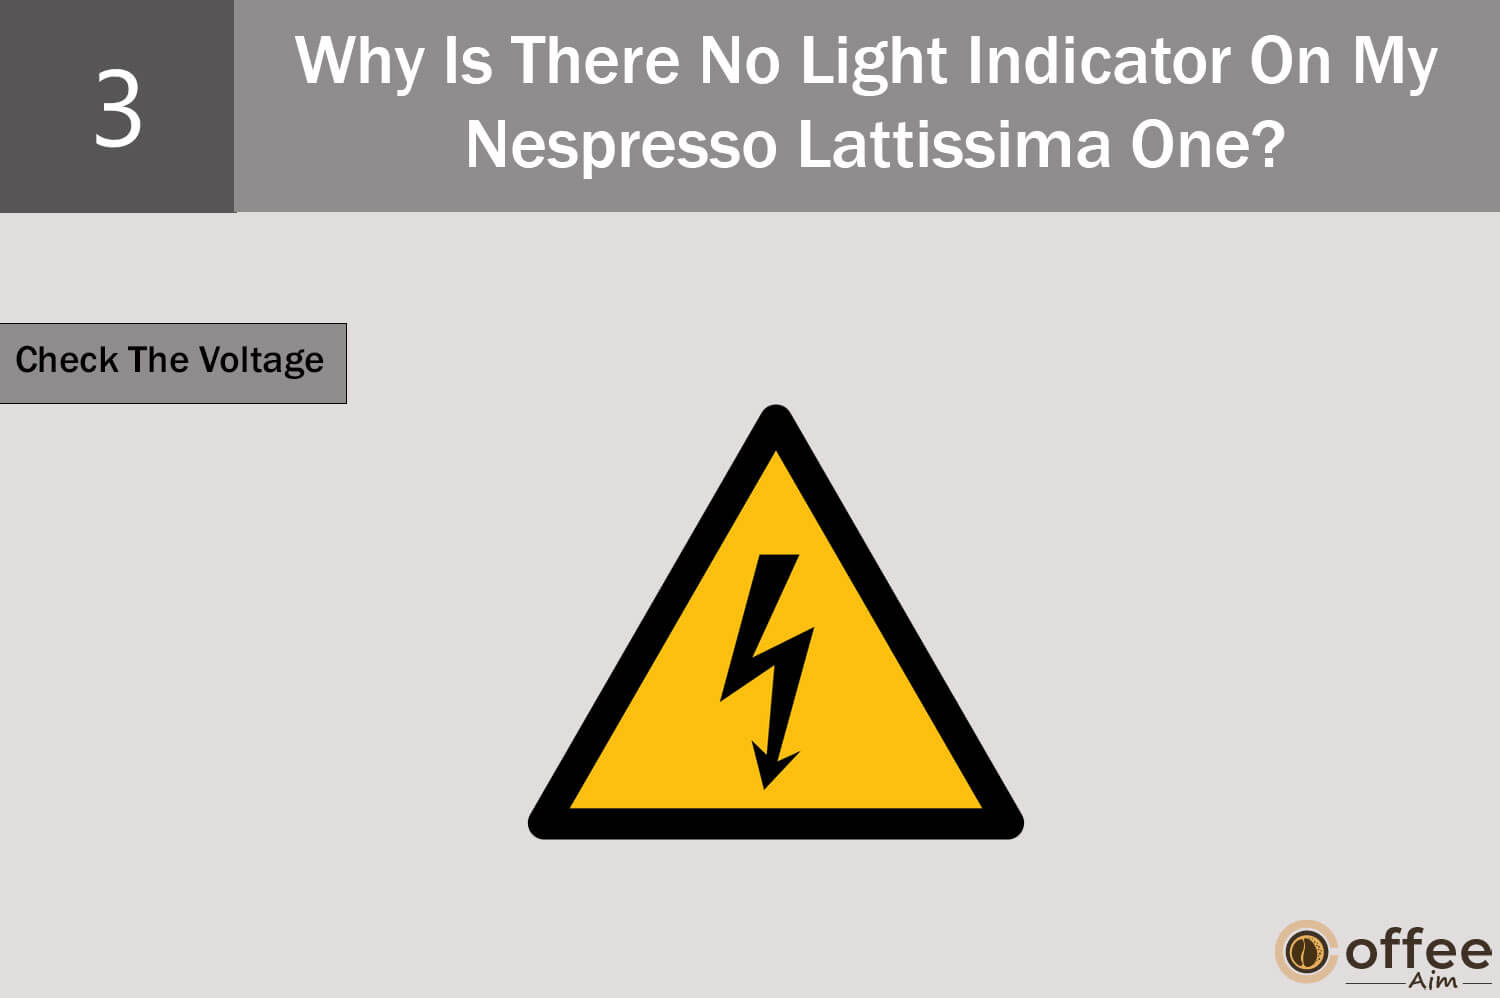 Prevent voltage fluctuation by verifying voltage compatibility before plugging your Nespresso Lattissima One. Ensure a steady power supply with the correct 220-240V input for optimal performance.